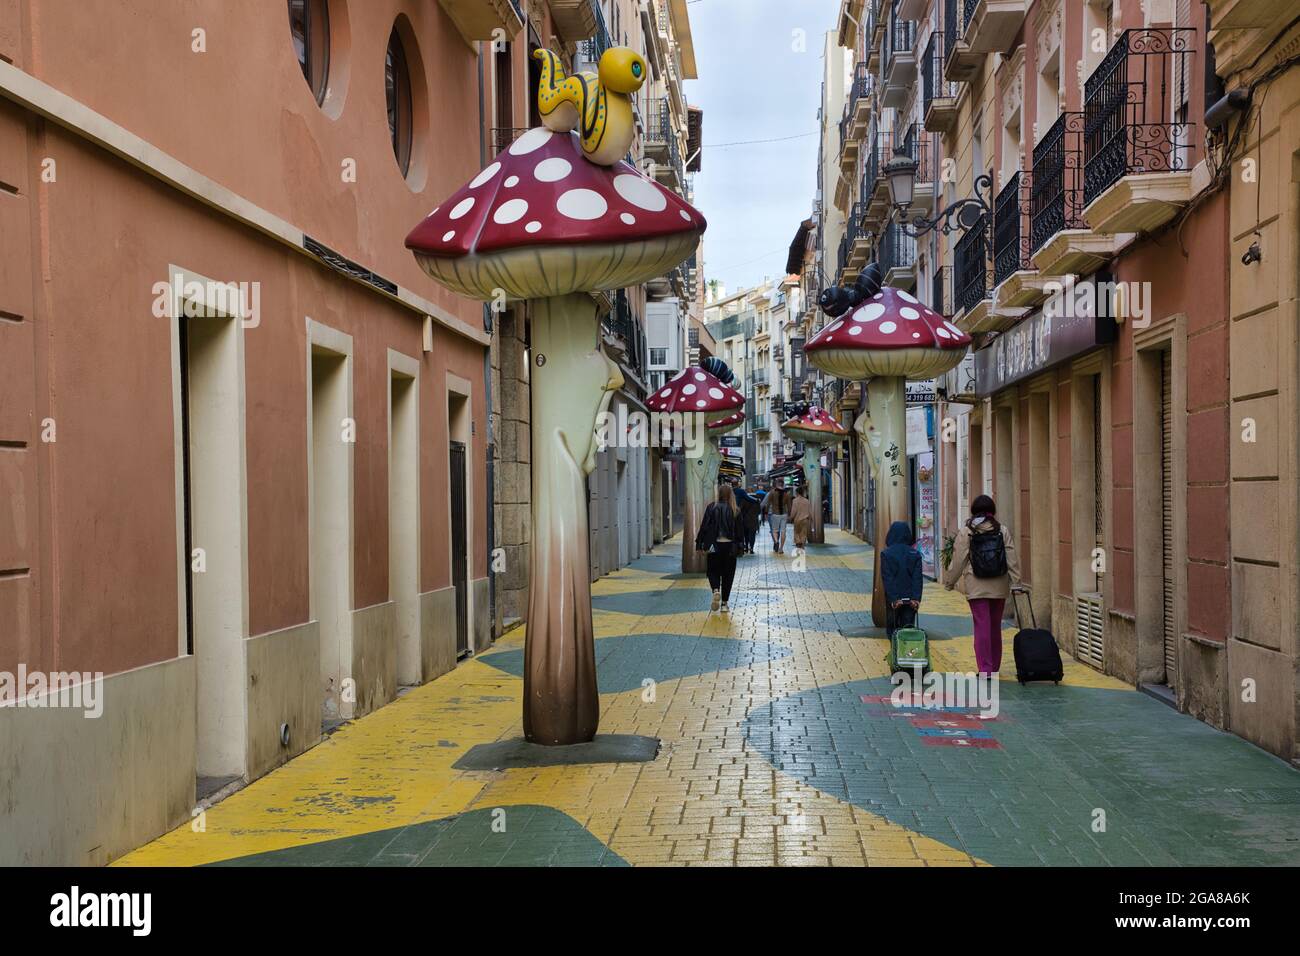 A paved alleyway with tall giant art mushrooms spaced out and people walking in Alicante city, Spain Stock Photo